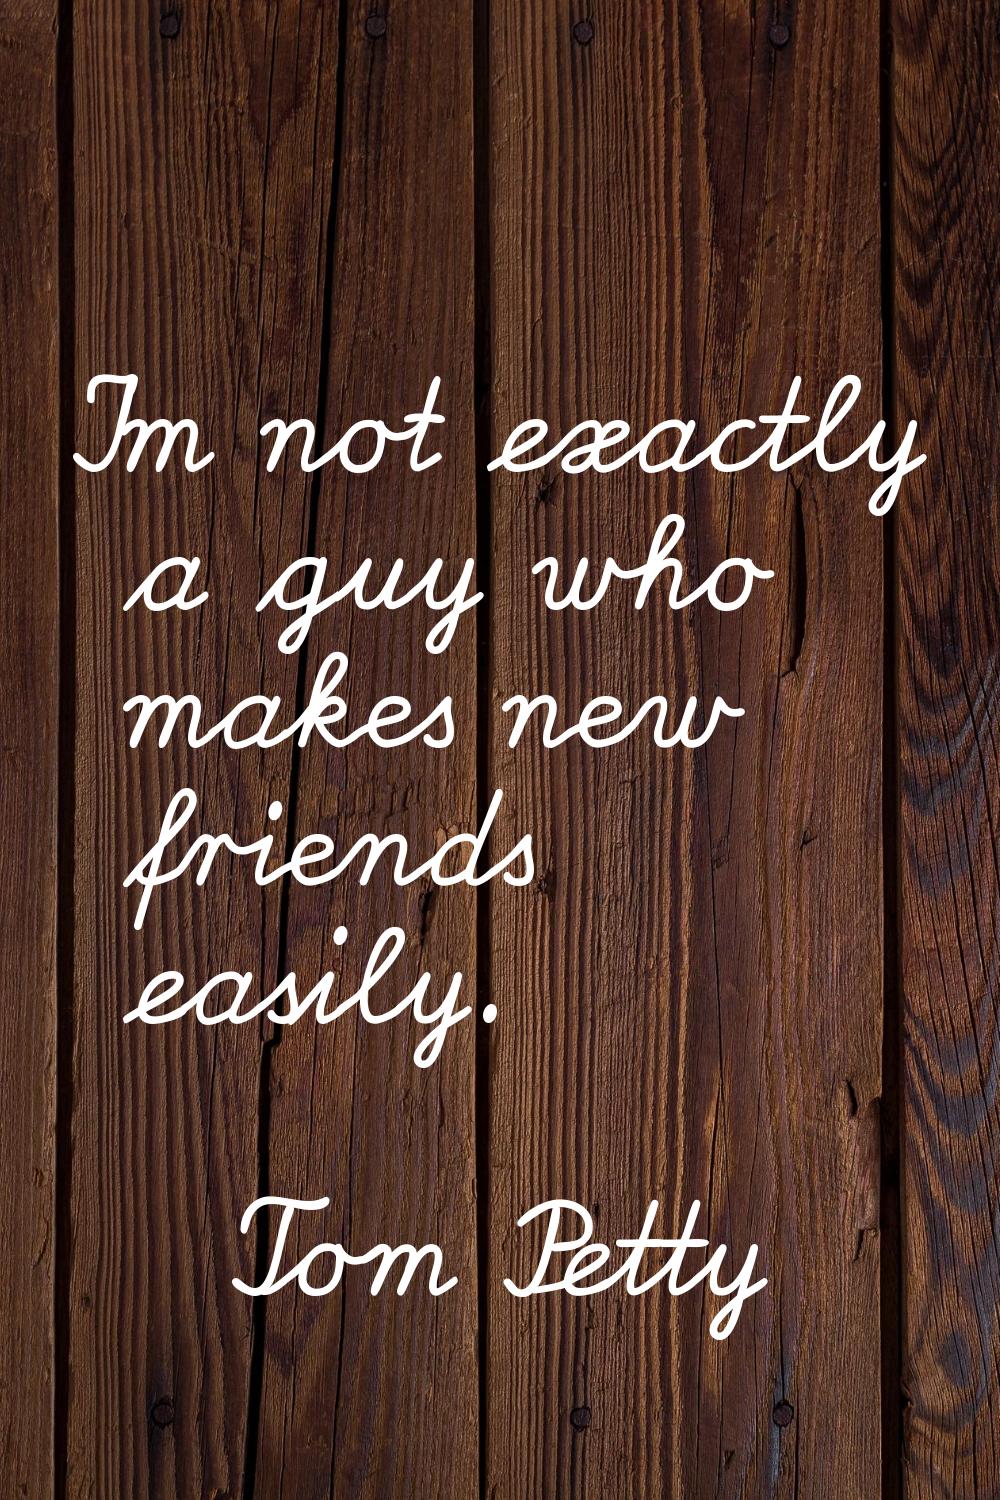 I'm not exactly a guy who makes new friends easily.